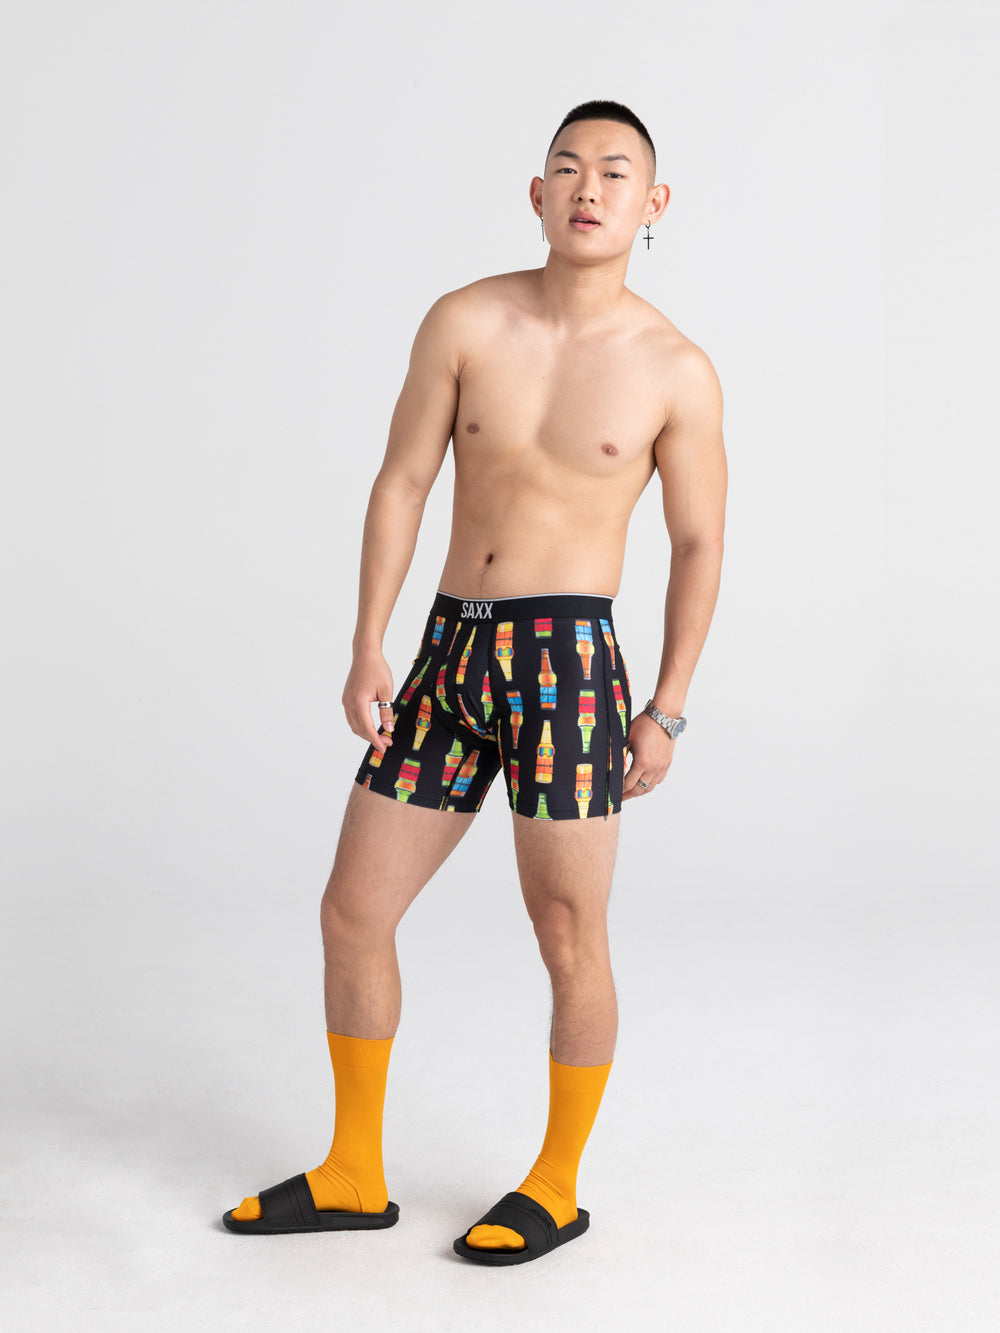 SAXX VOLT BOXER BRIEFING - BEER GOGGLES - CLEARANCE